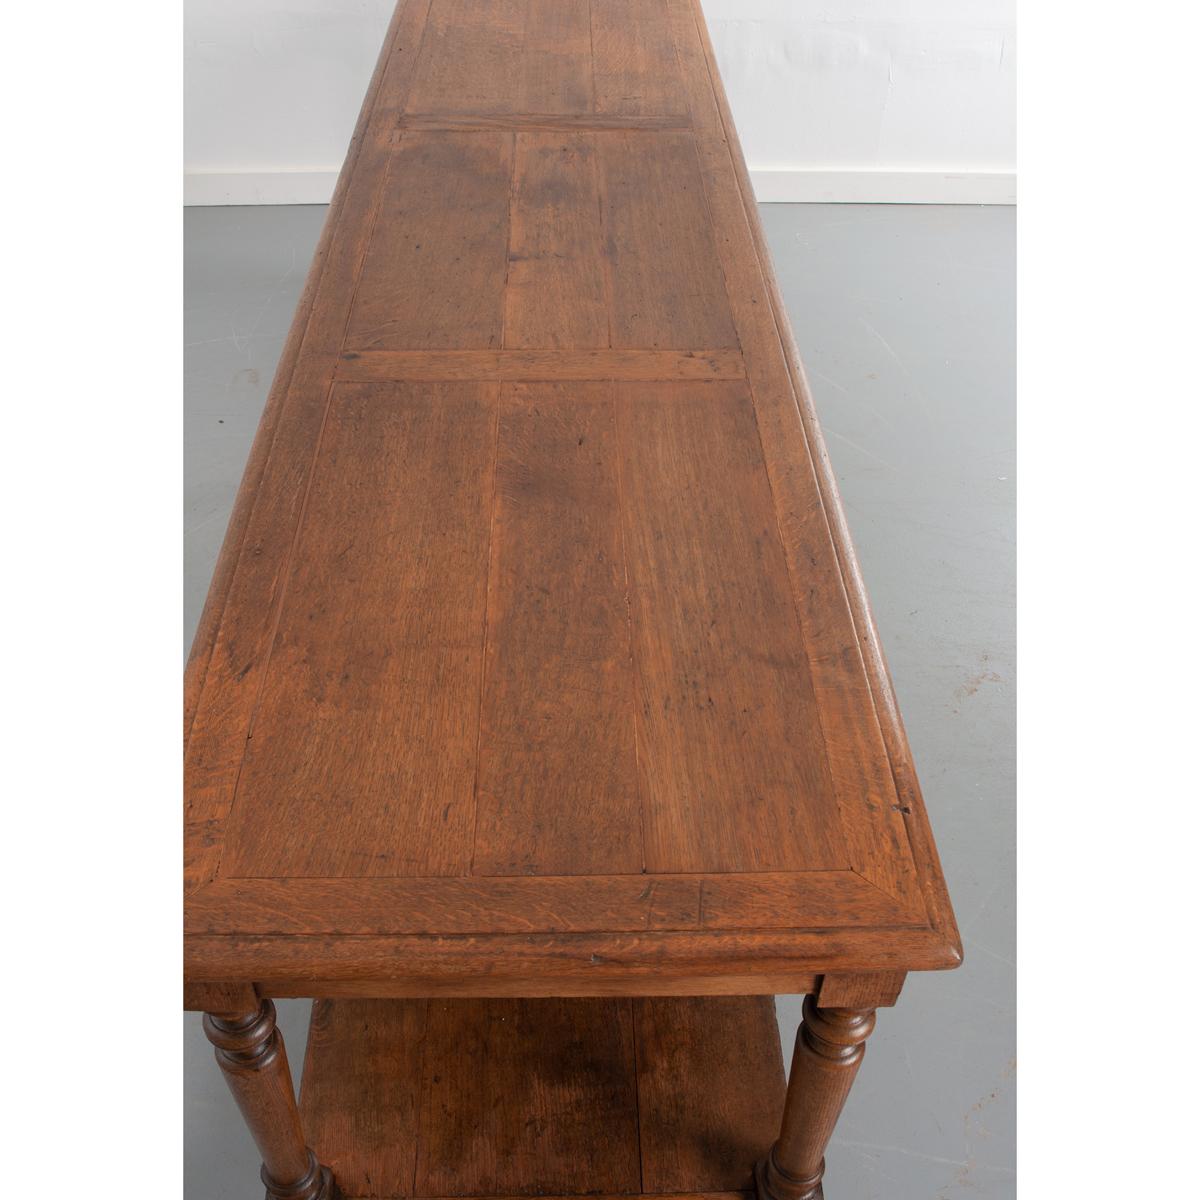 This monumental oak drapery table is from France and is over nine and a half feet long! The surface is divided into three sections with a border around each, all constructed of beautiful, rich oak planks. This large top rests upon an apron and eight